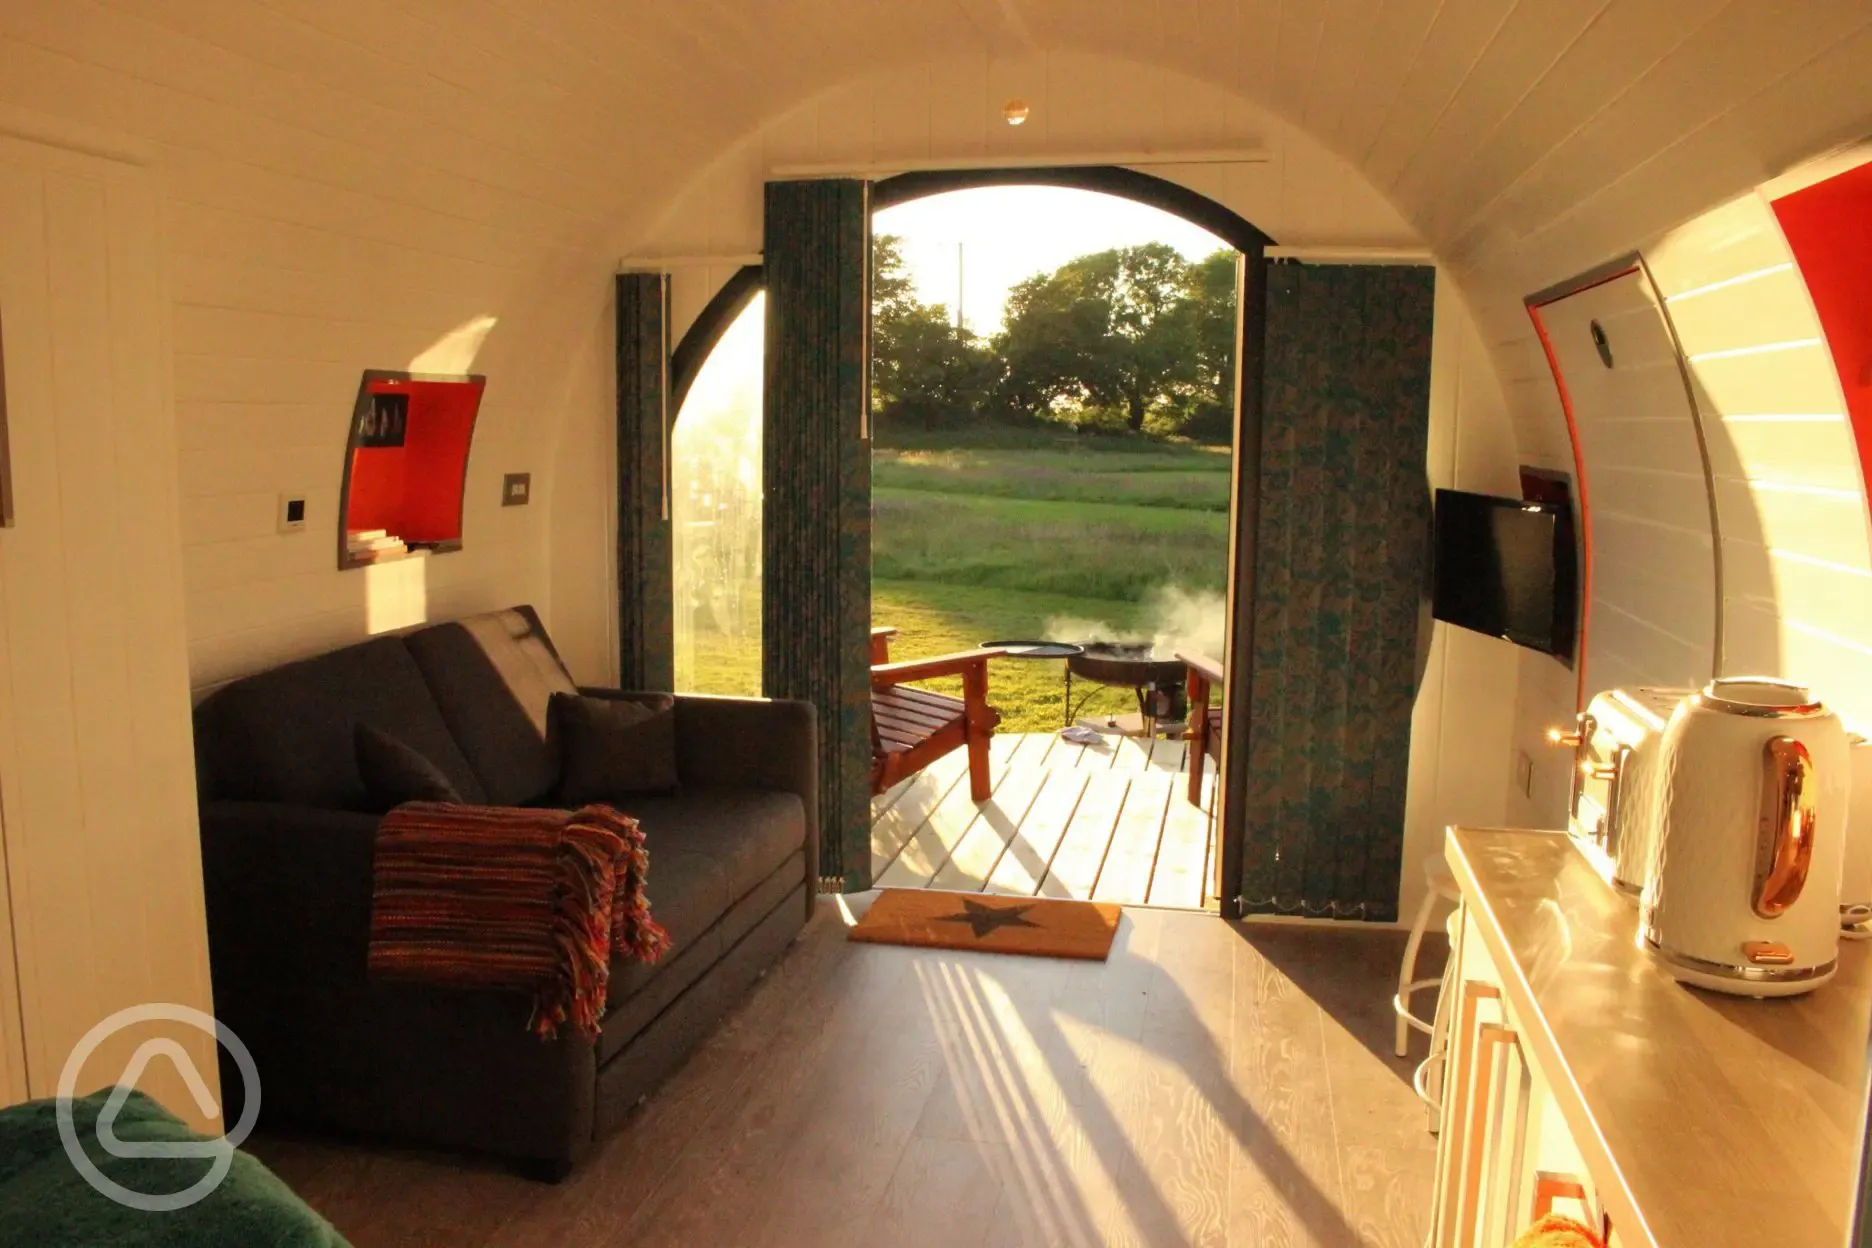 Glamping interior at pod at Stackpole Under the Stars